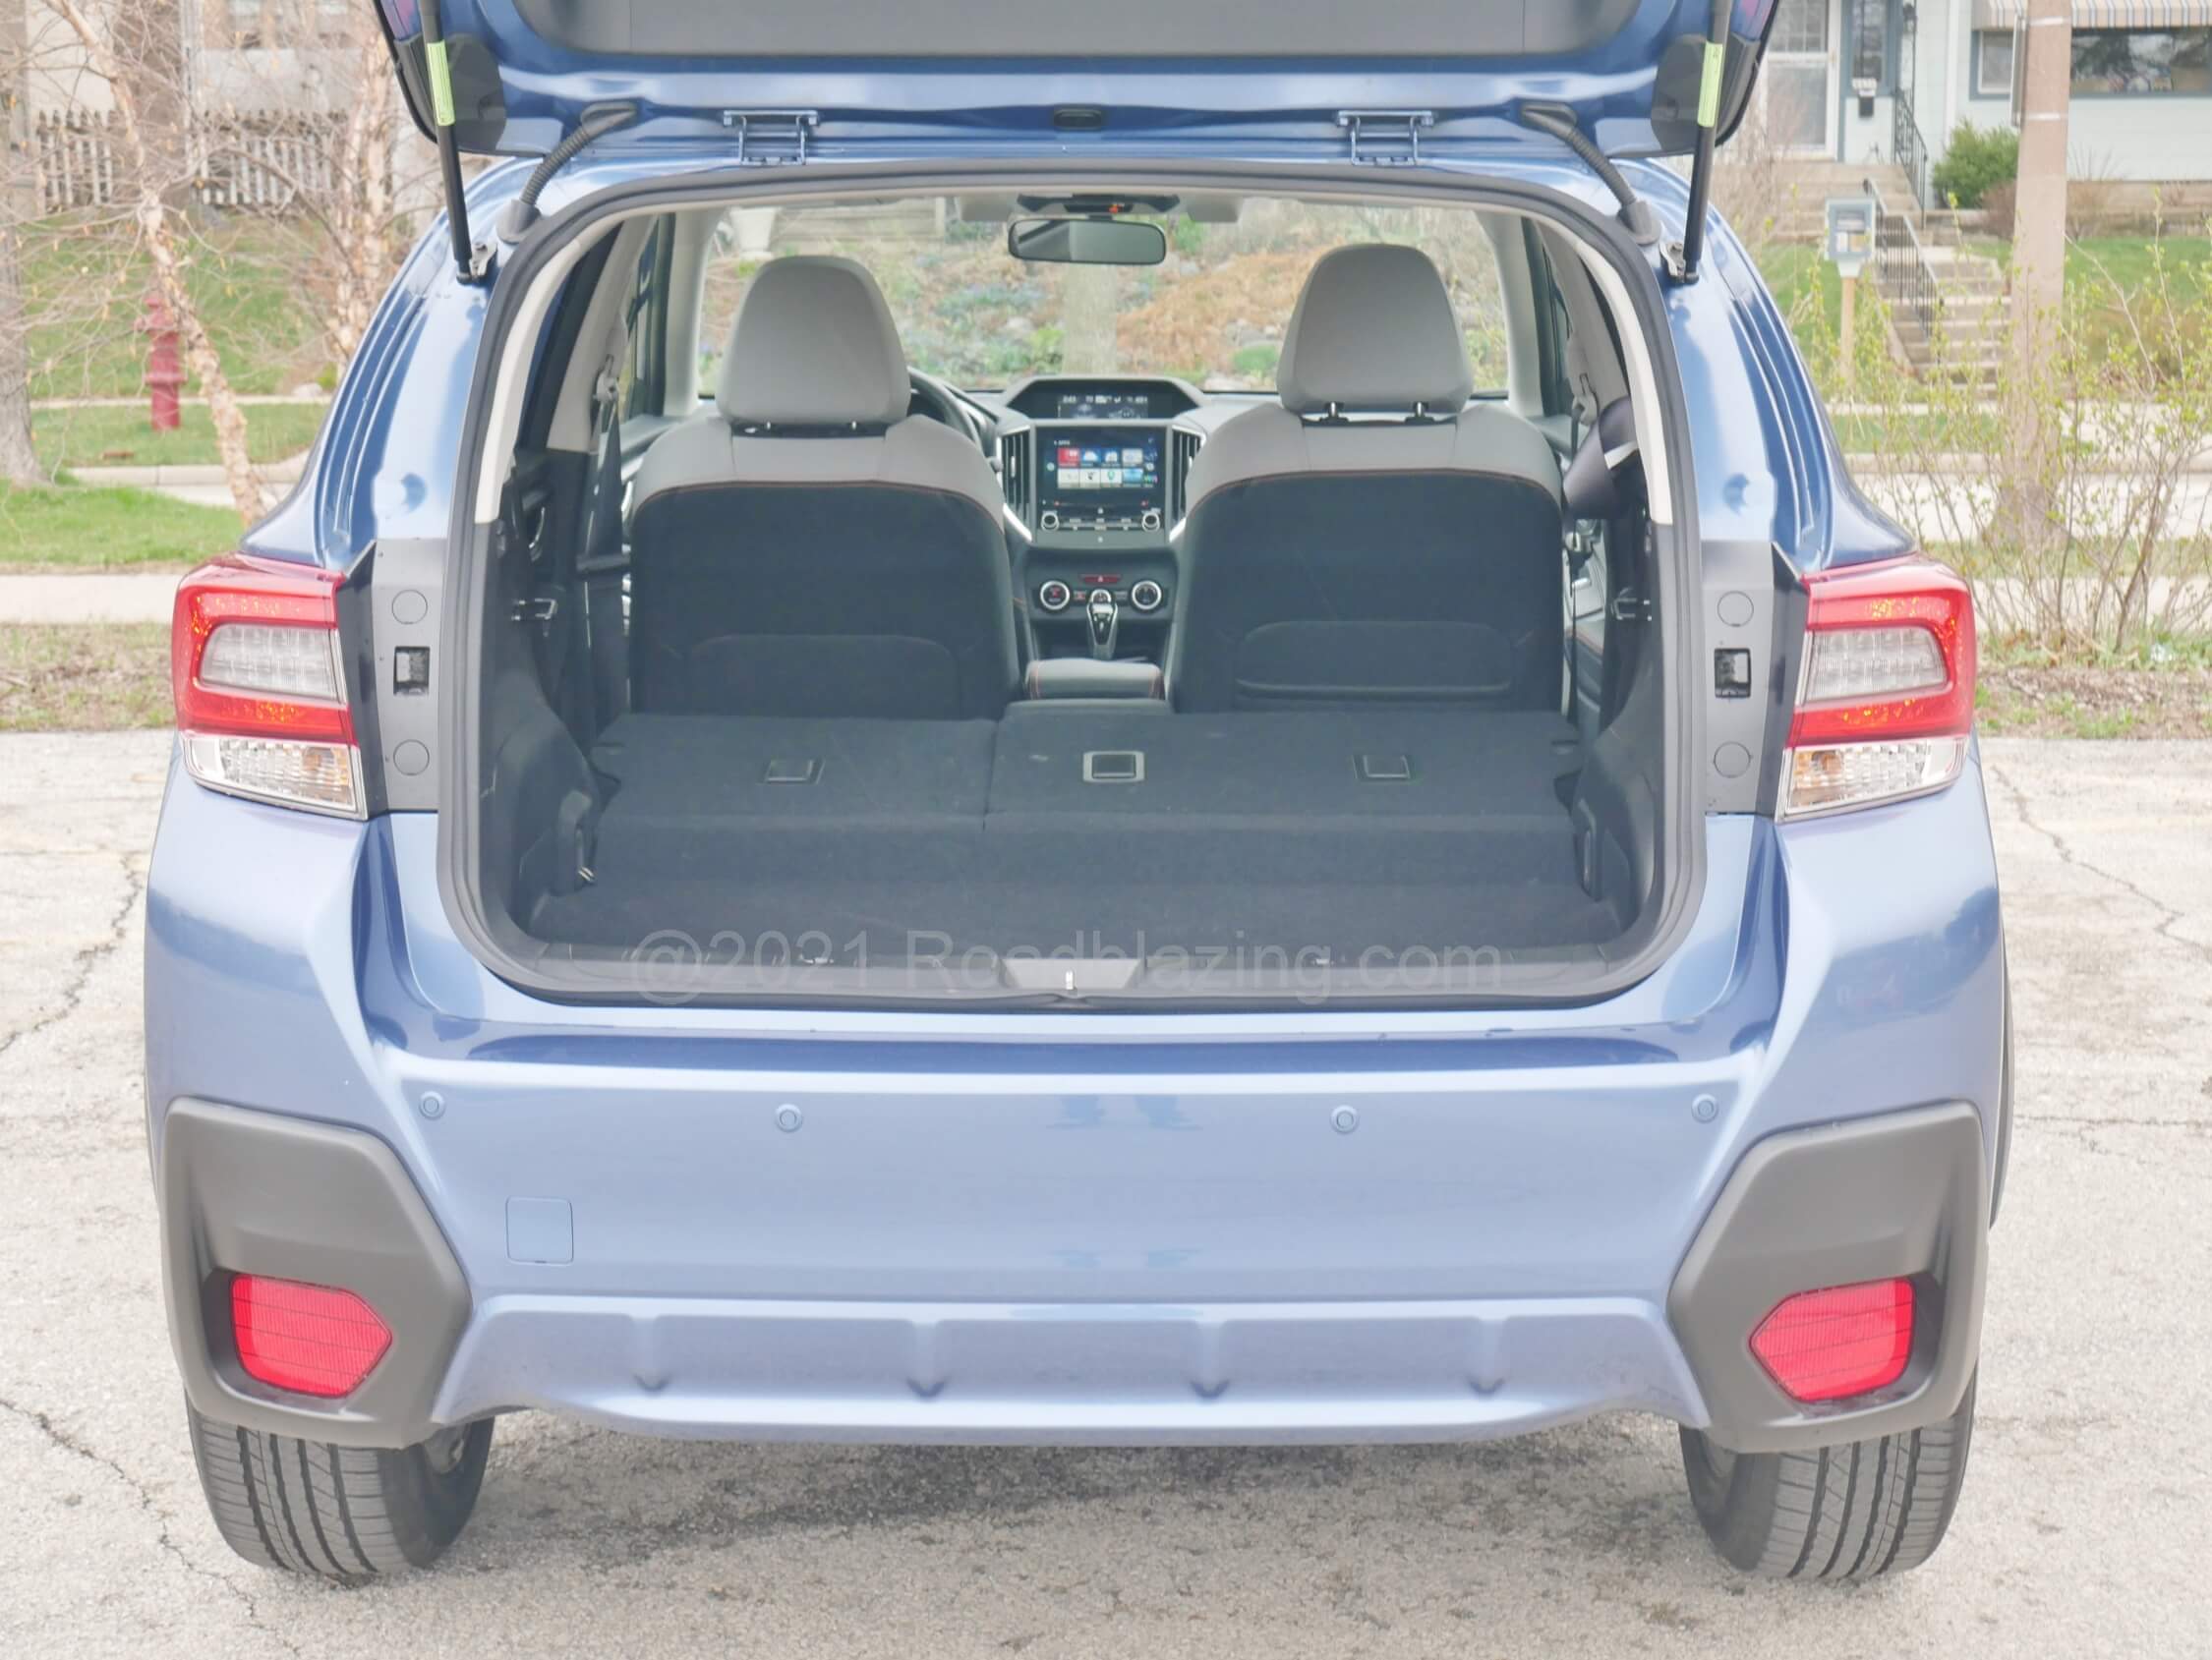 2021 Subaru Crosstrek Limited 2.5L: a wide and tall liftgate with minimal wheel arch intrusion